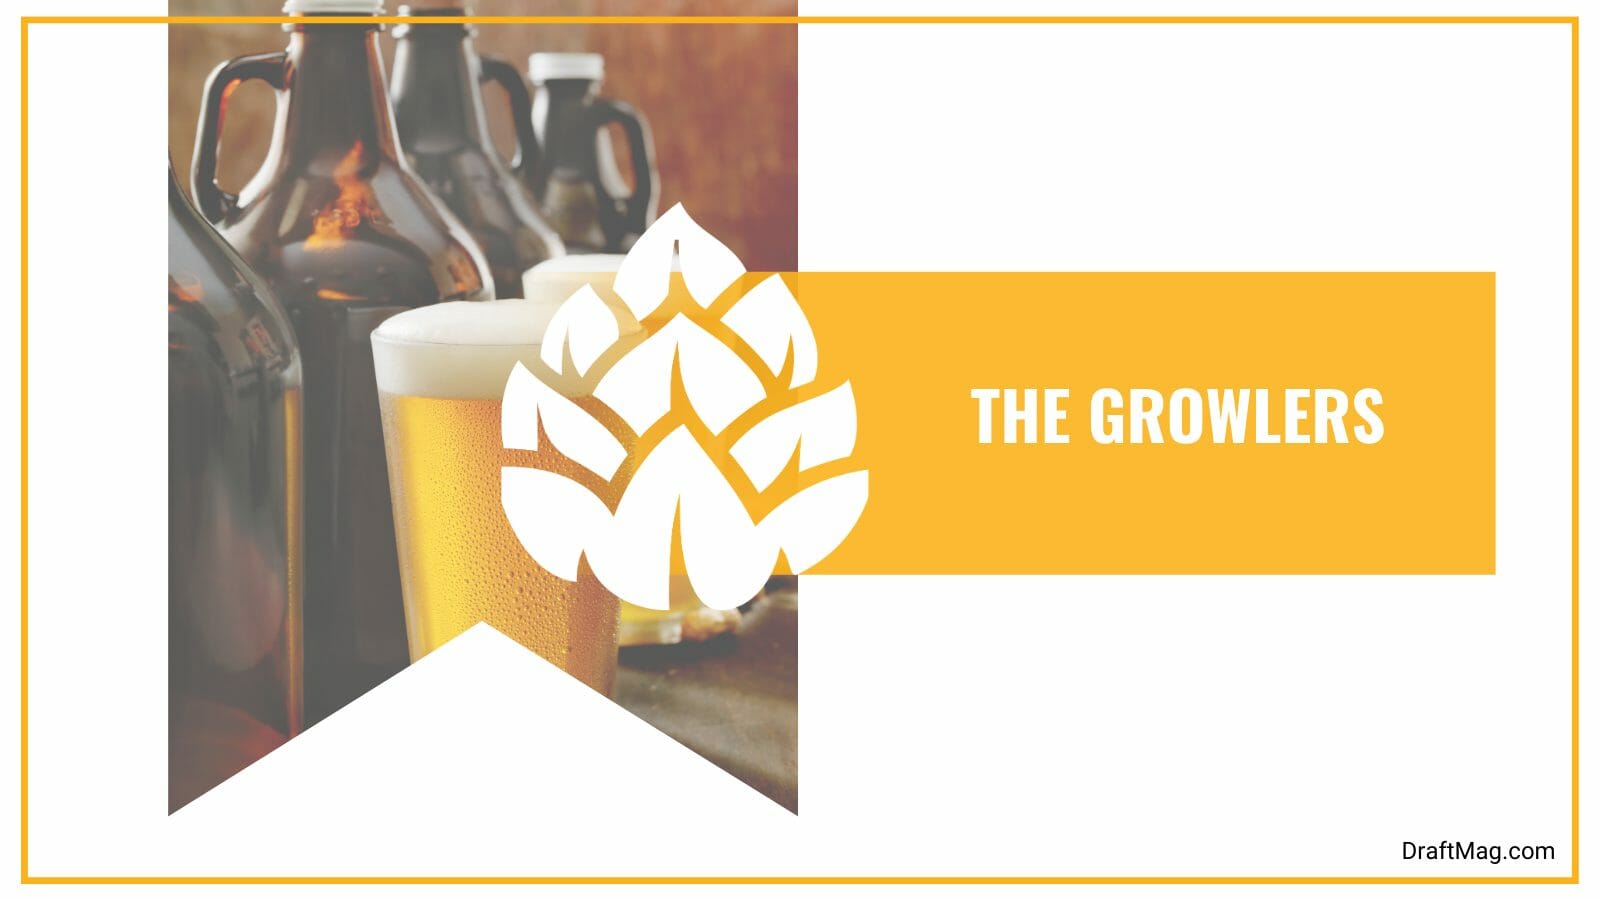 Growlers has the Largest Capacity